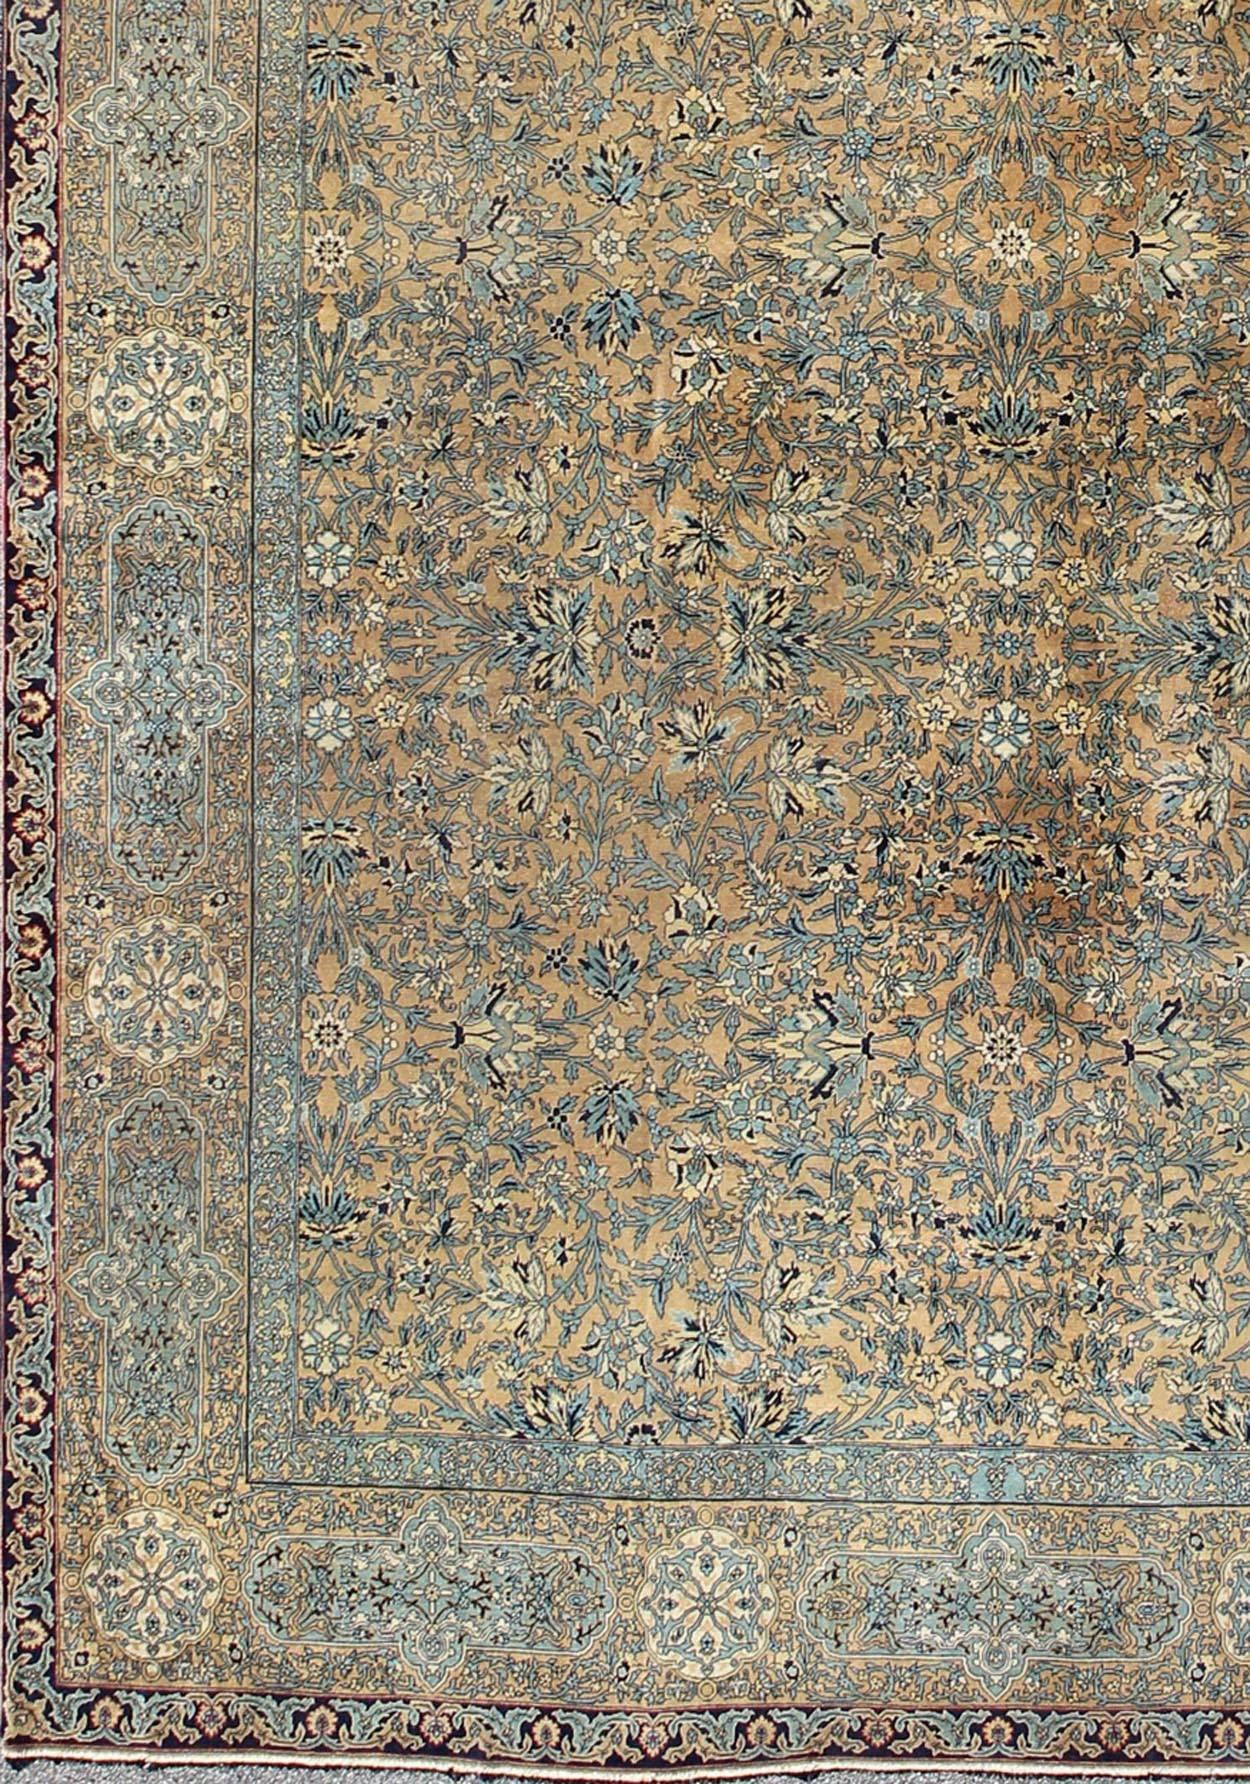 This sophisticated antique Indian Amritsar is characterized by an all-over floral and amazing intricate details. The colors are light brown and shades of blue.
Measures: 10.5 x 16.8